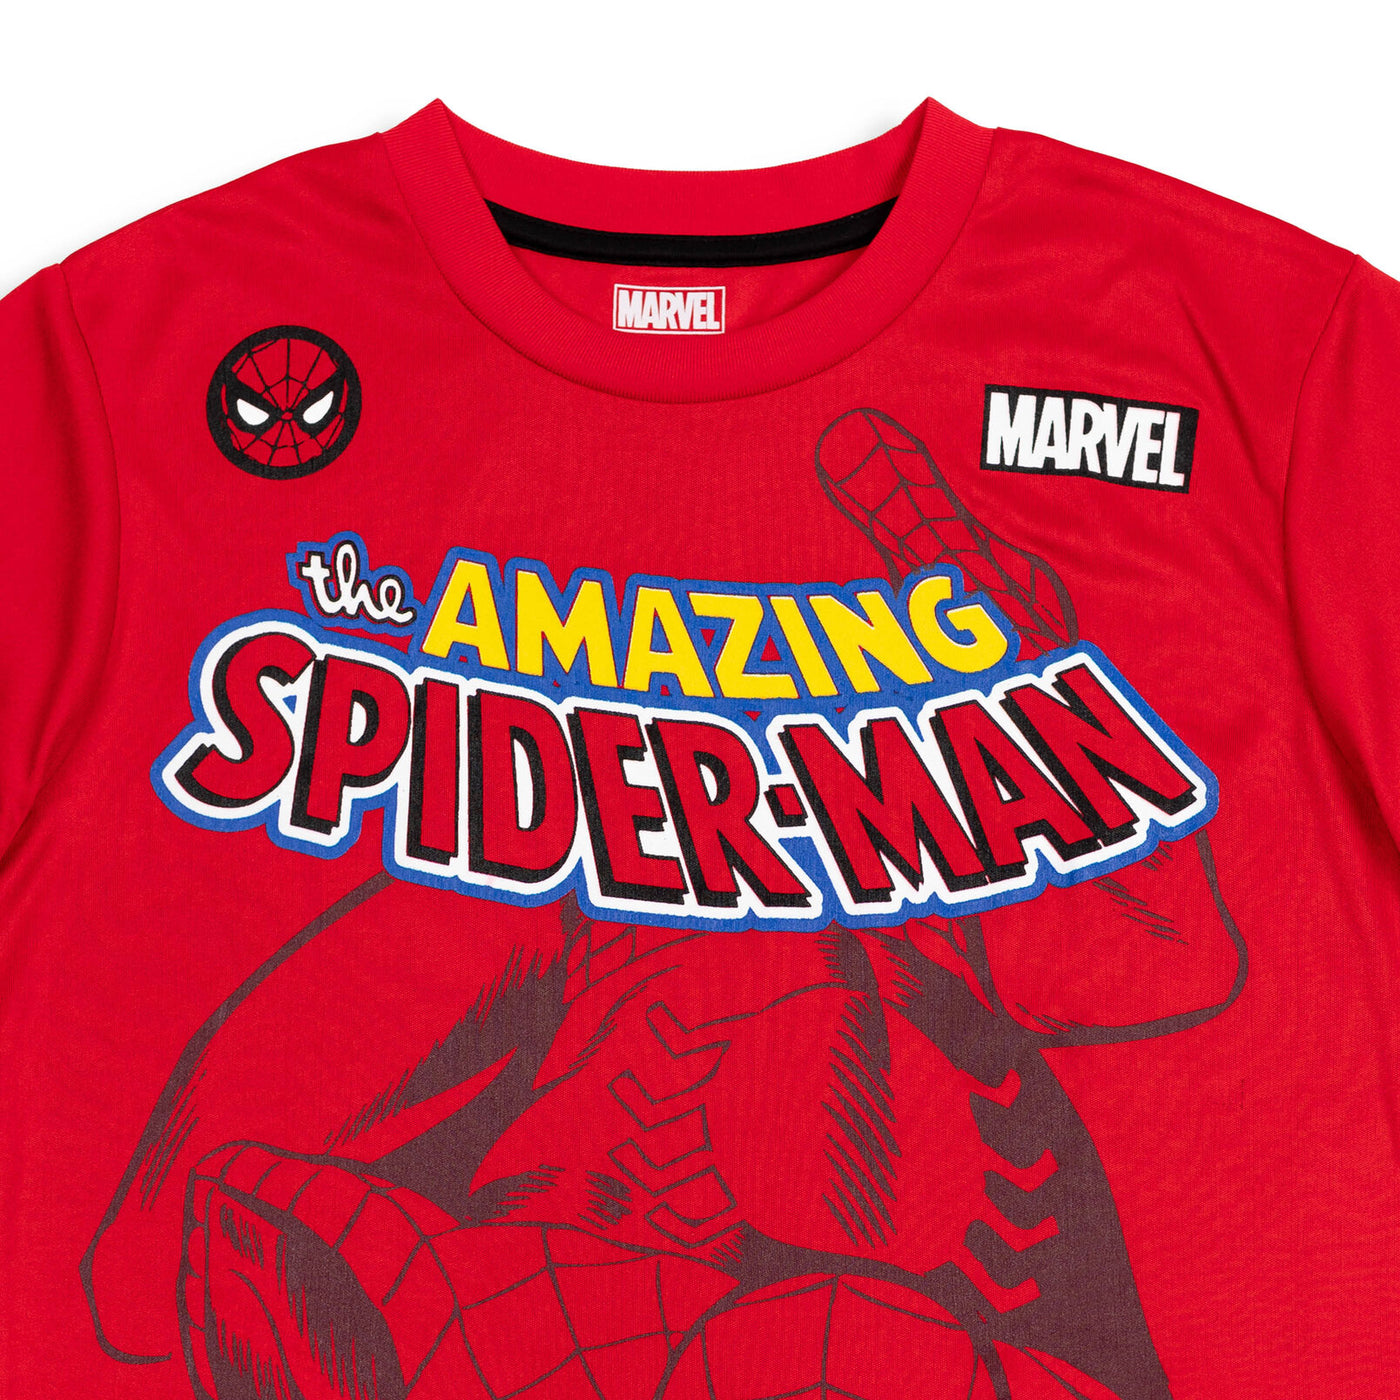 Marvel Avengers Spider-Man T-Shirt and Mesh Shorts Outfit Set